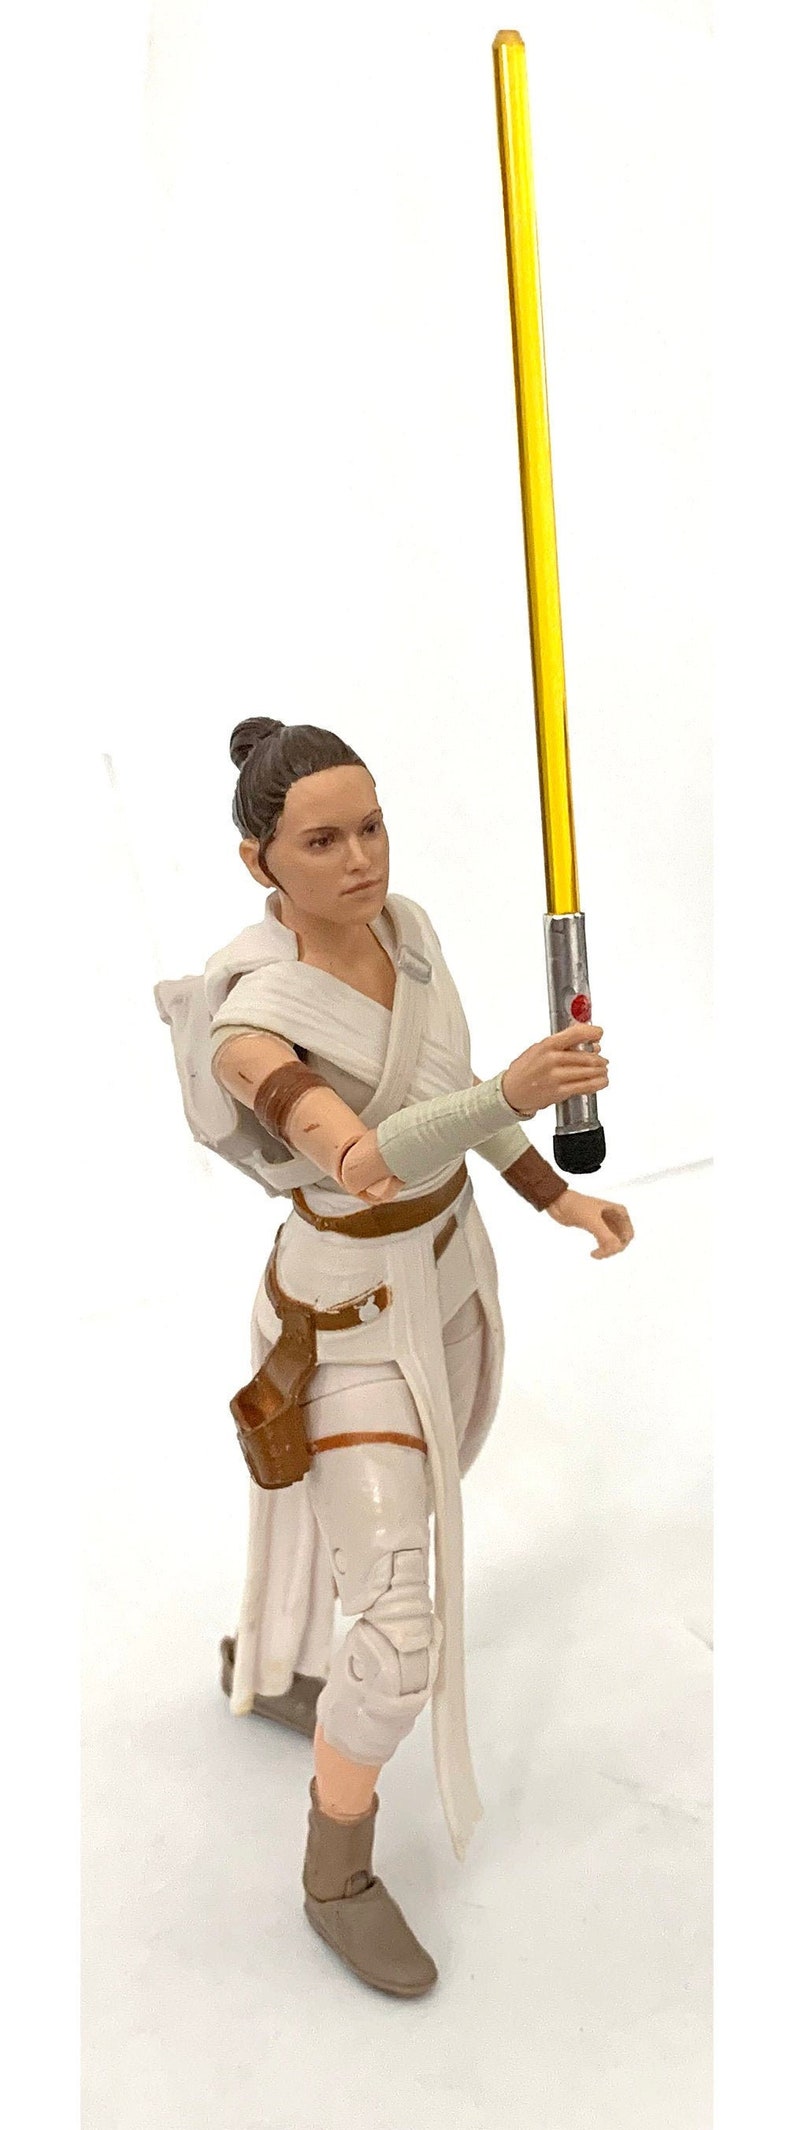 CUSTOM Replacement Lightsabers Kid Friendly Version. Great for your Star Wars Black Series 6 inch characters 1:12 Yellow